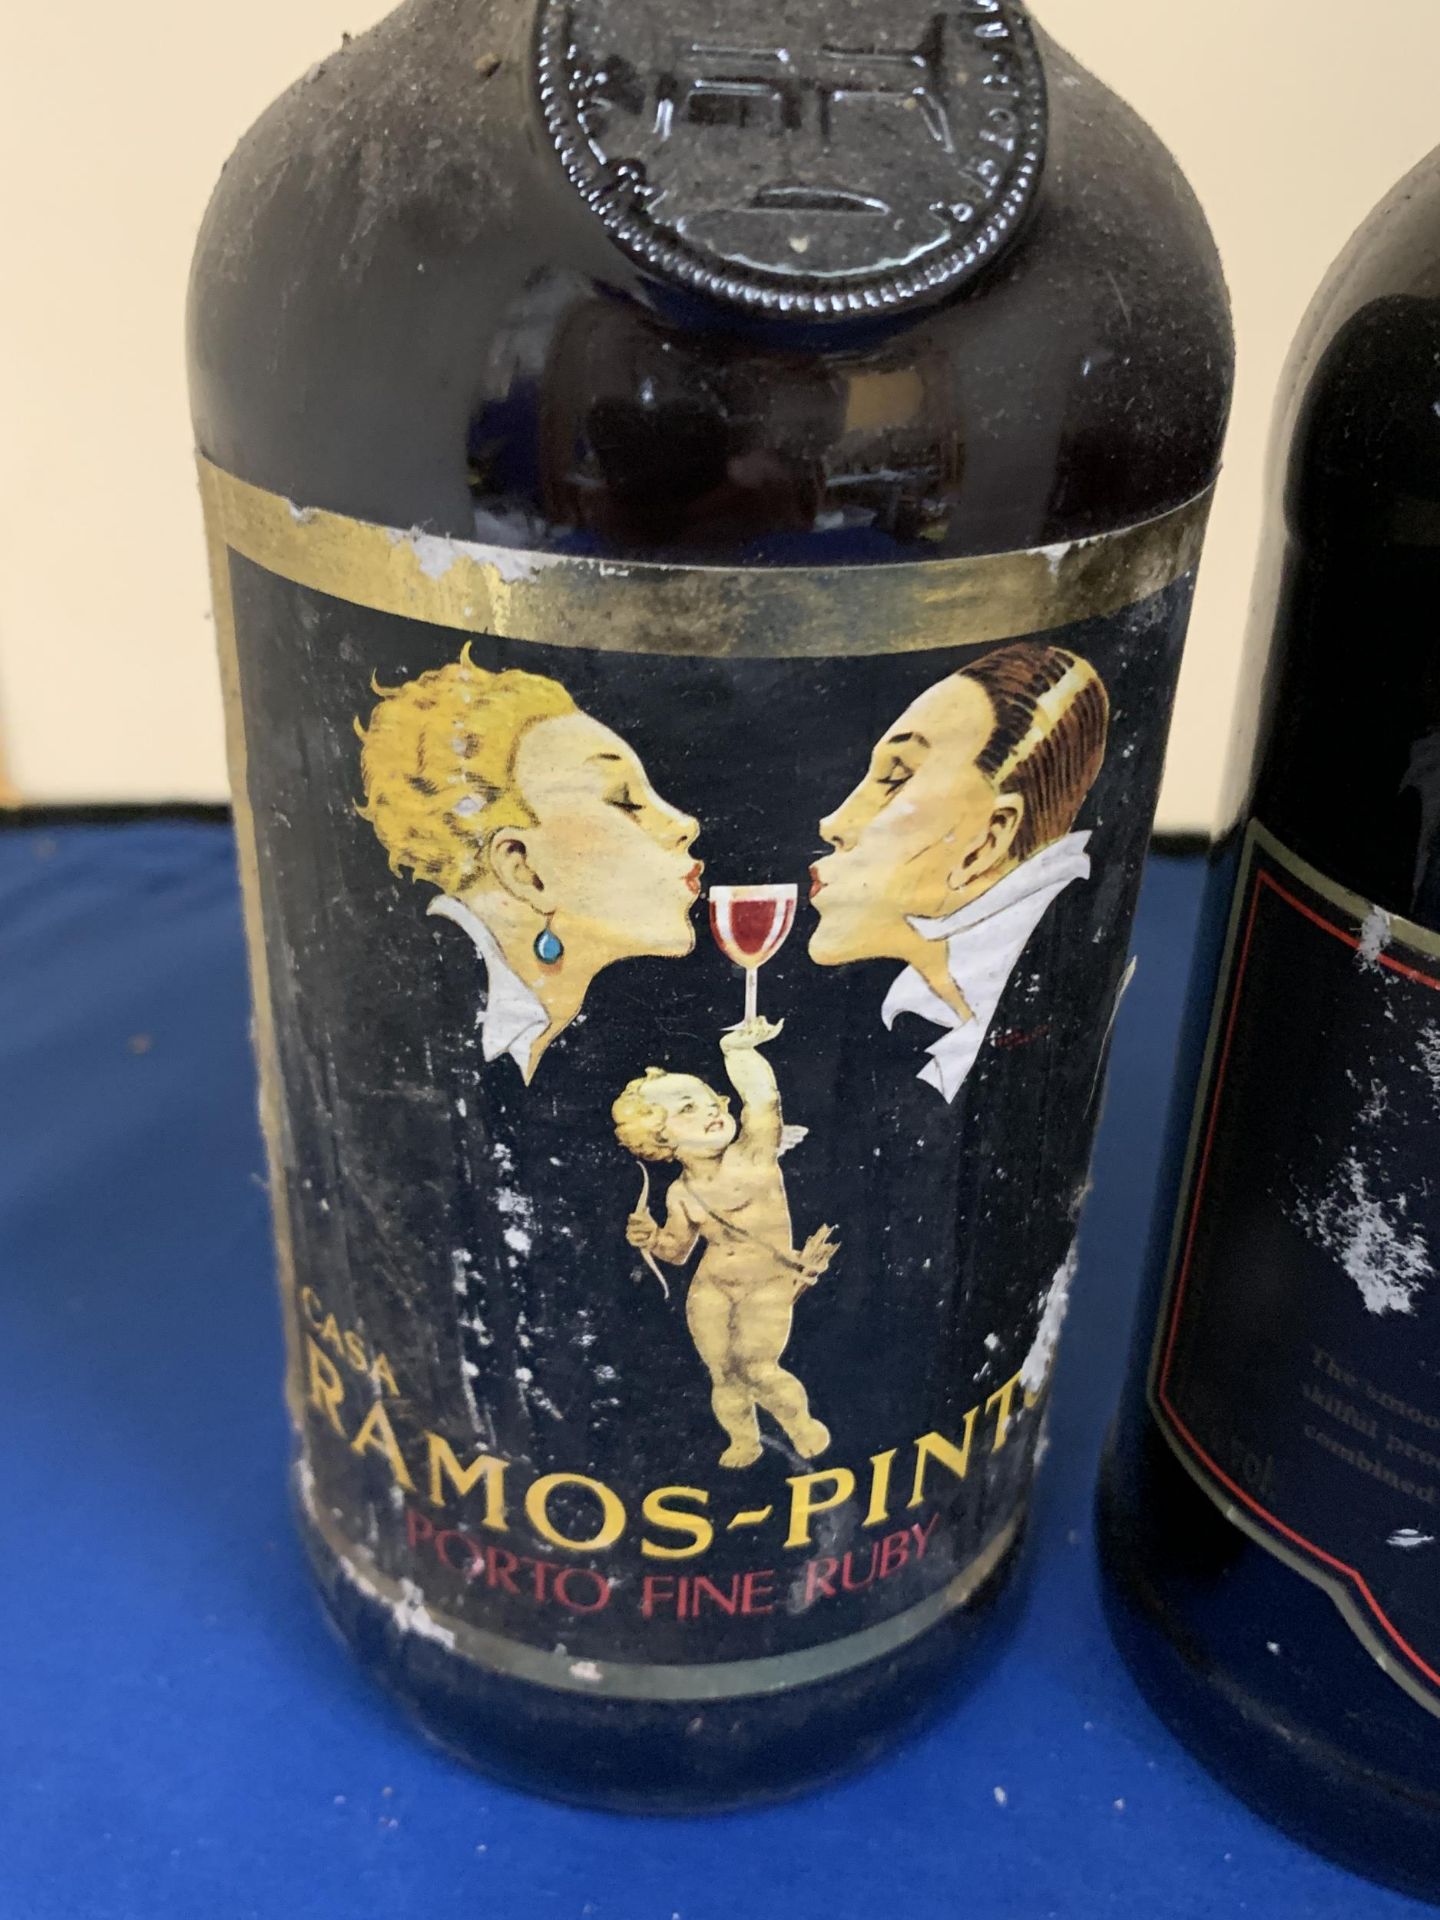 TWO BOTTLES TO INCLUDE A CASA RAMOS PINTO PORTO FINE RUBY AND A QC CREAM SHERRY - Bild 2 aus 4